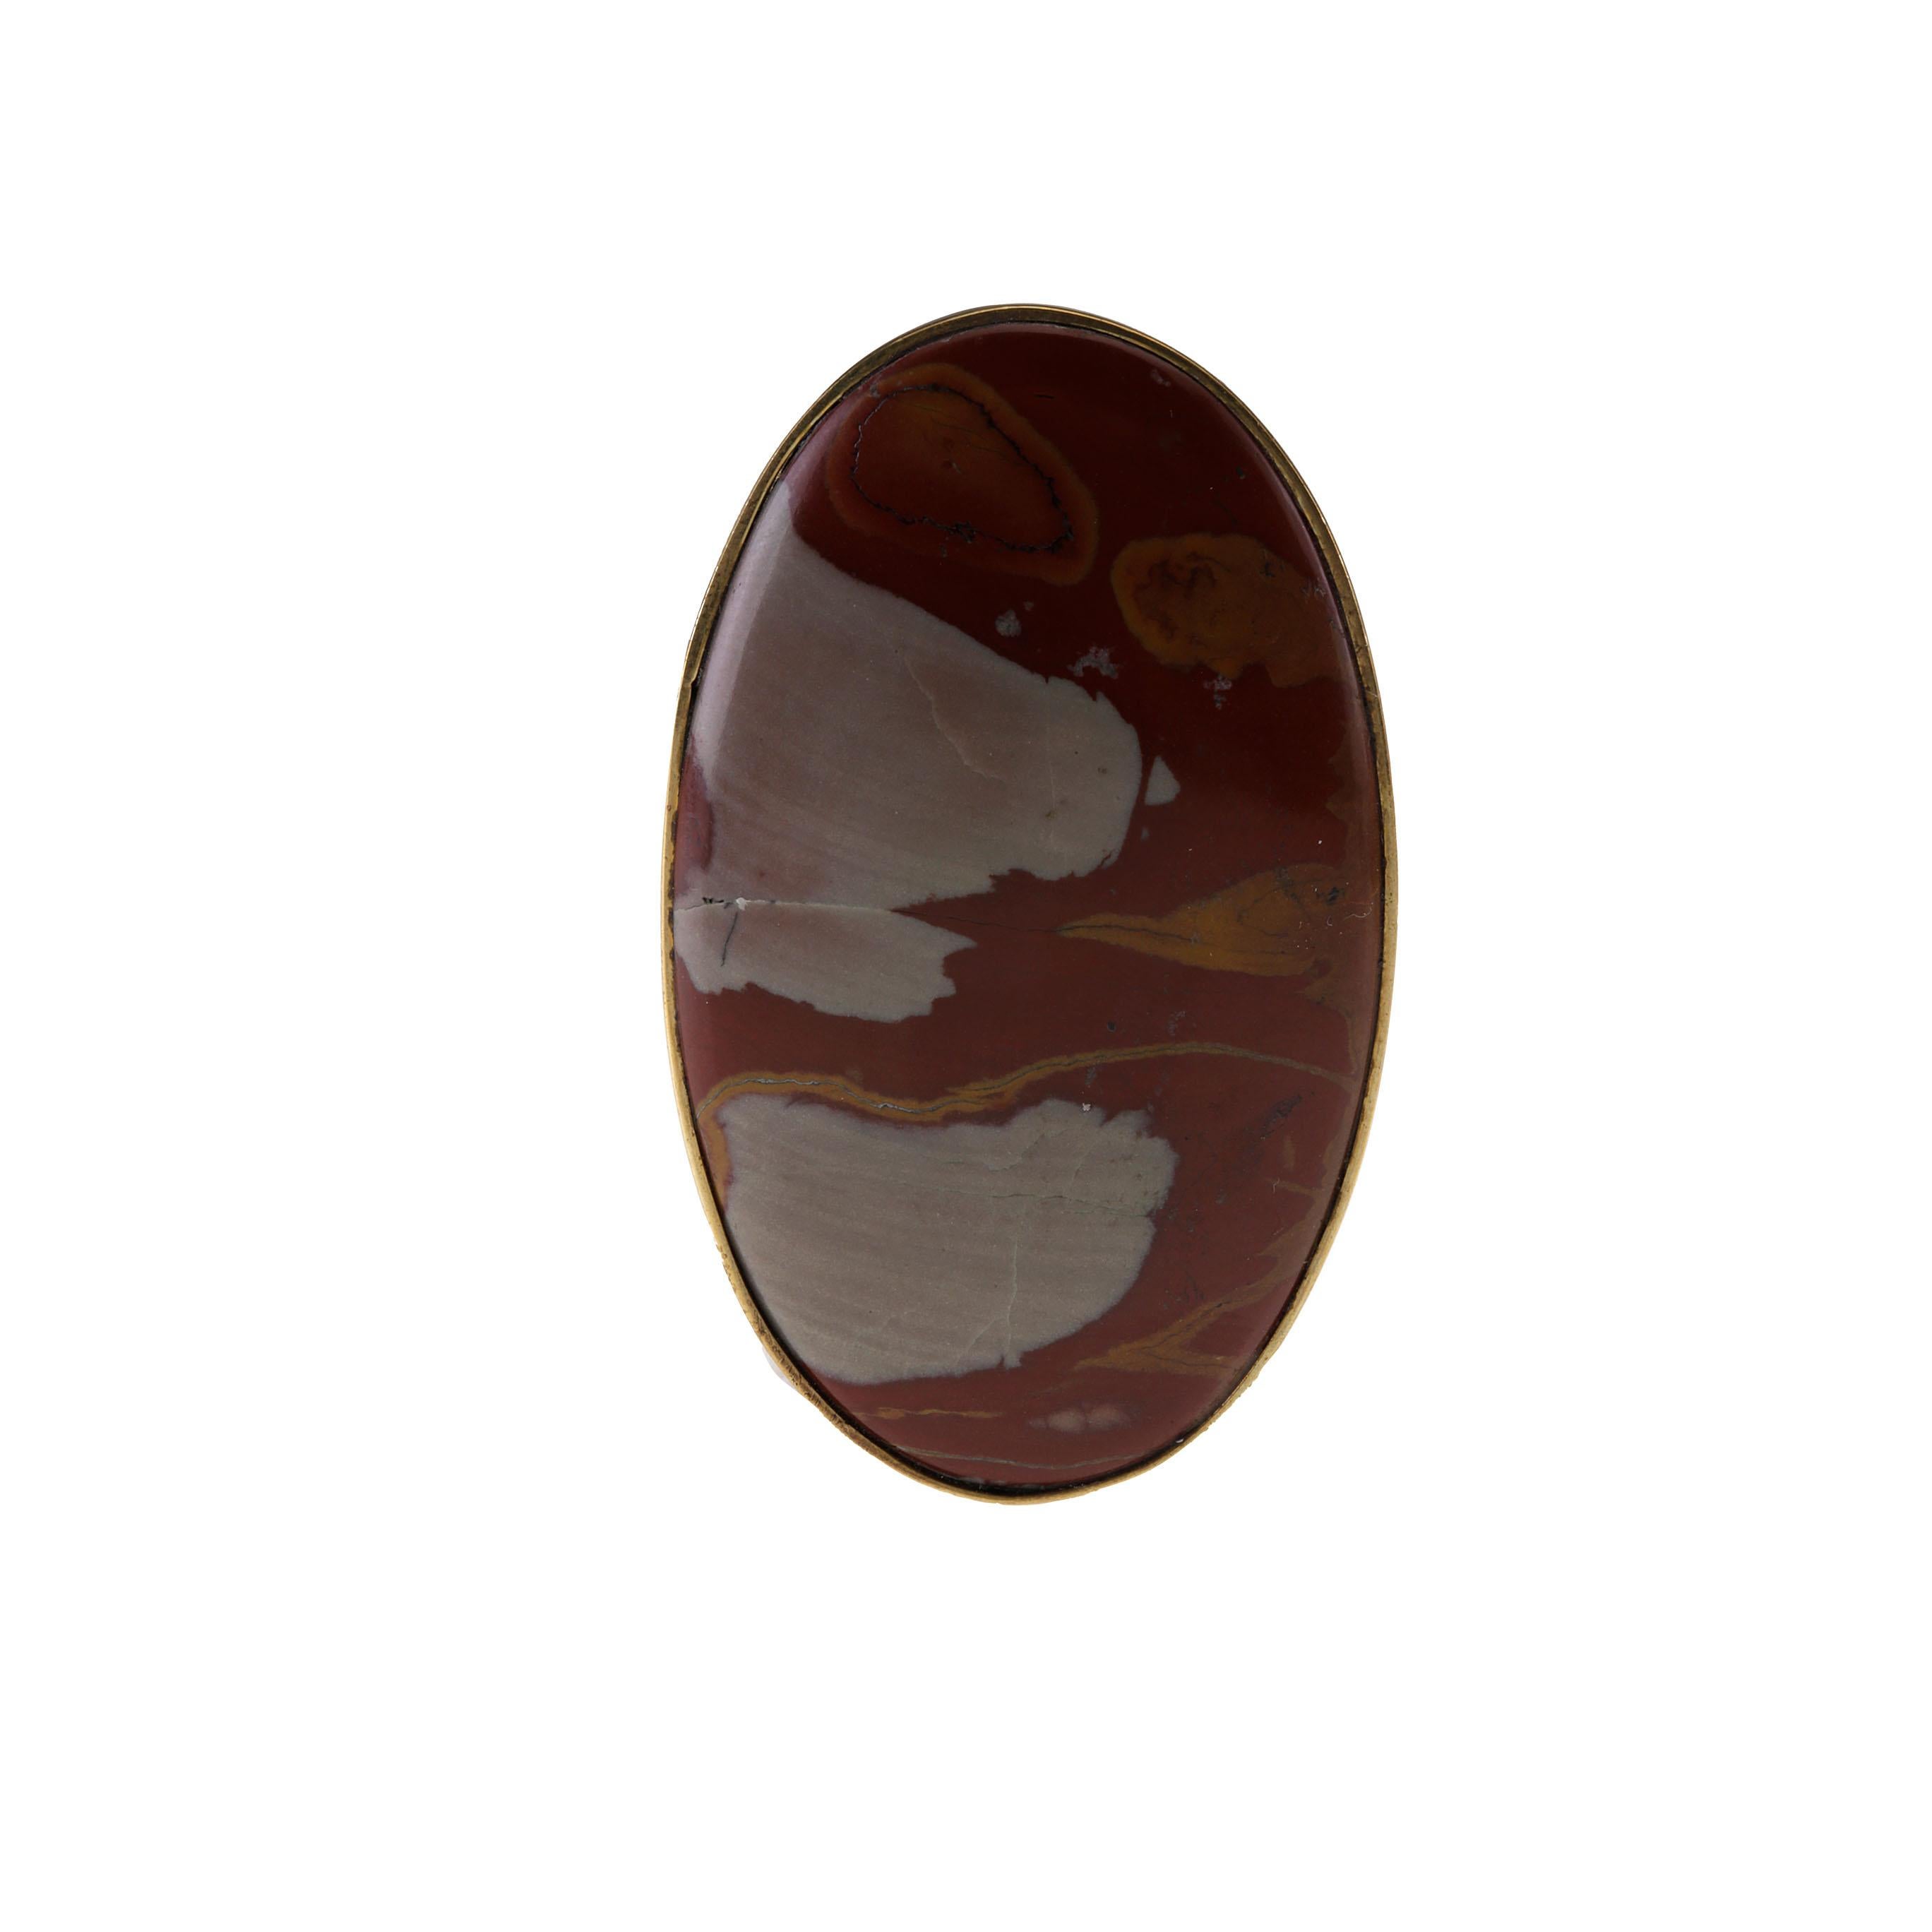 Jasper big bronze ring with Picasso jasper stone. Size 13 eu.
All Giulia Colussi jewelry is new and has never been previously owned or worn. Each item will arrive at your door beautifully gift wrapped in our boxes, put inside an elegant pouch or